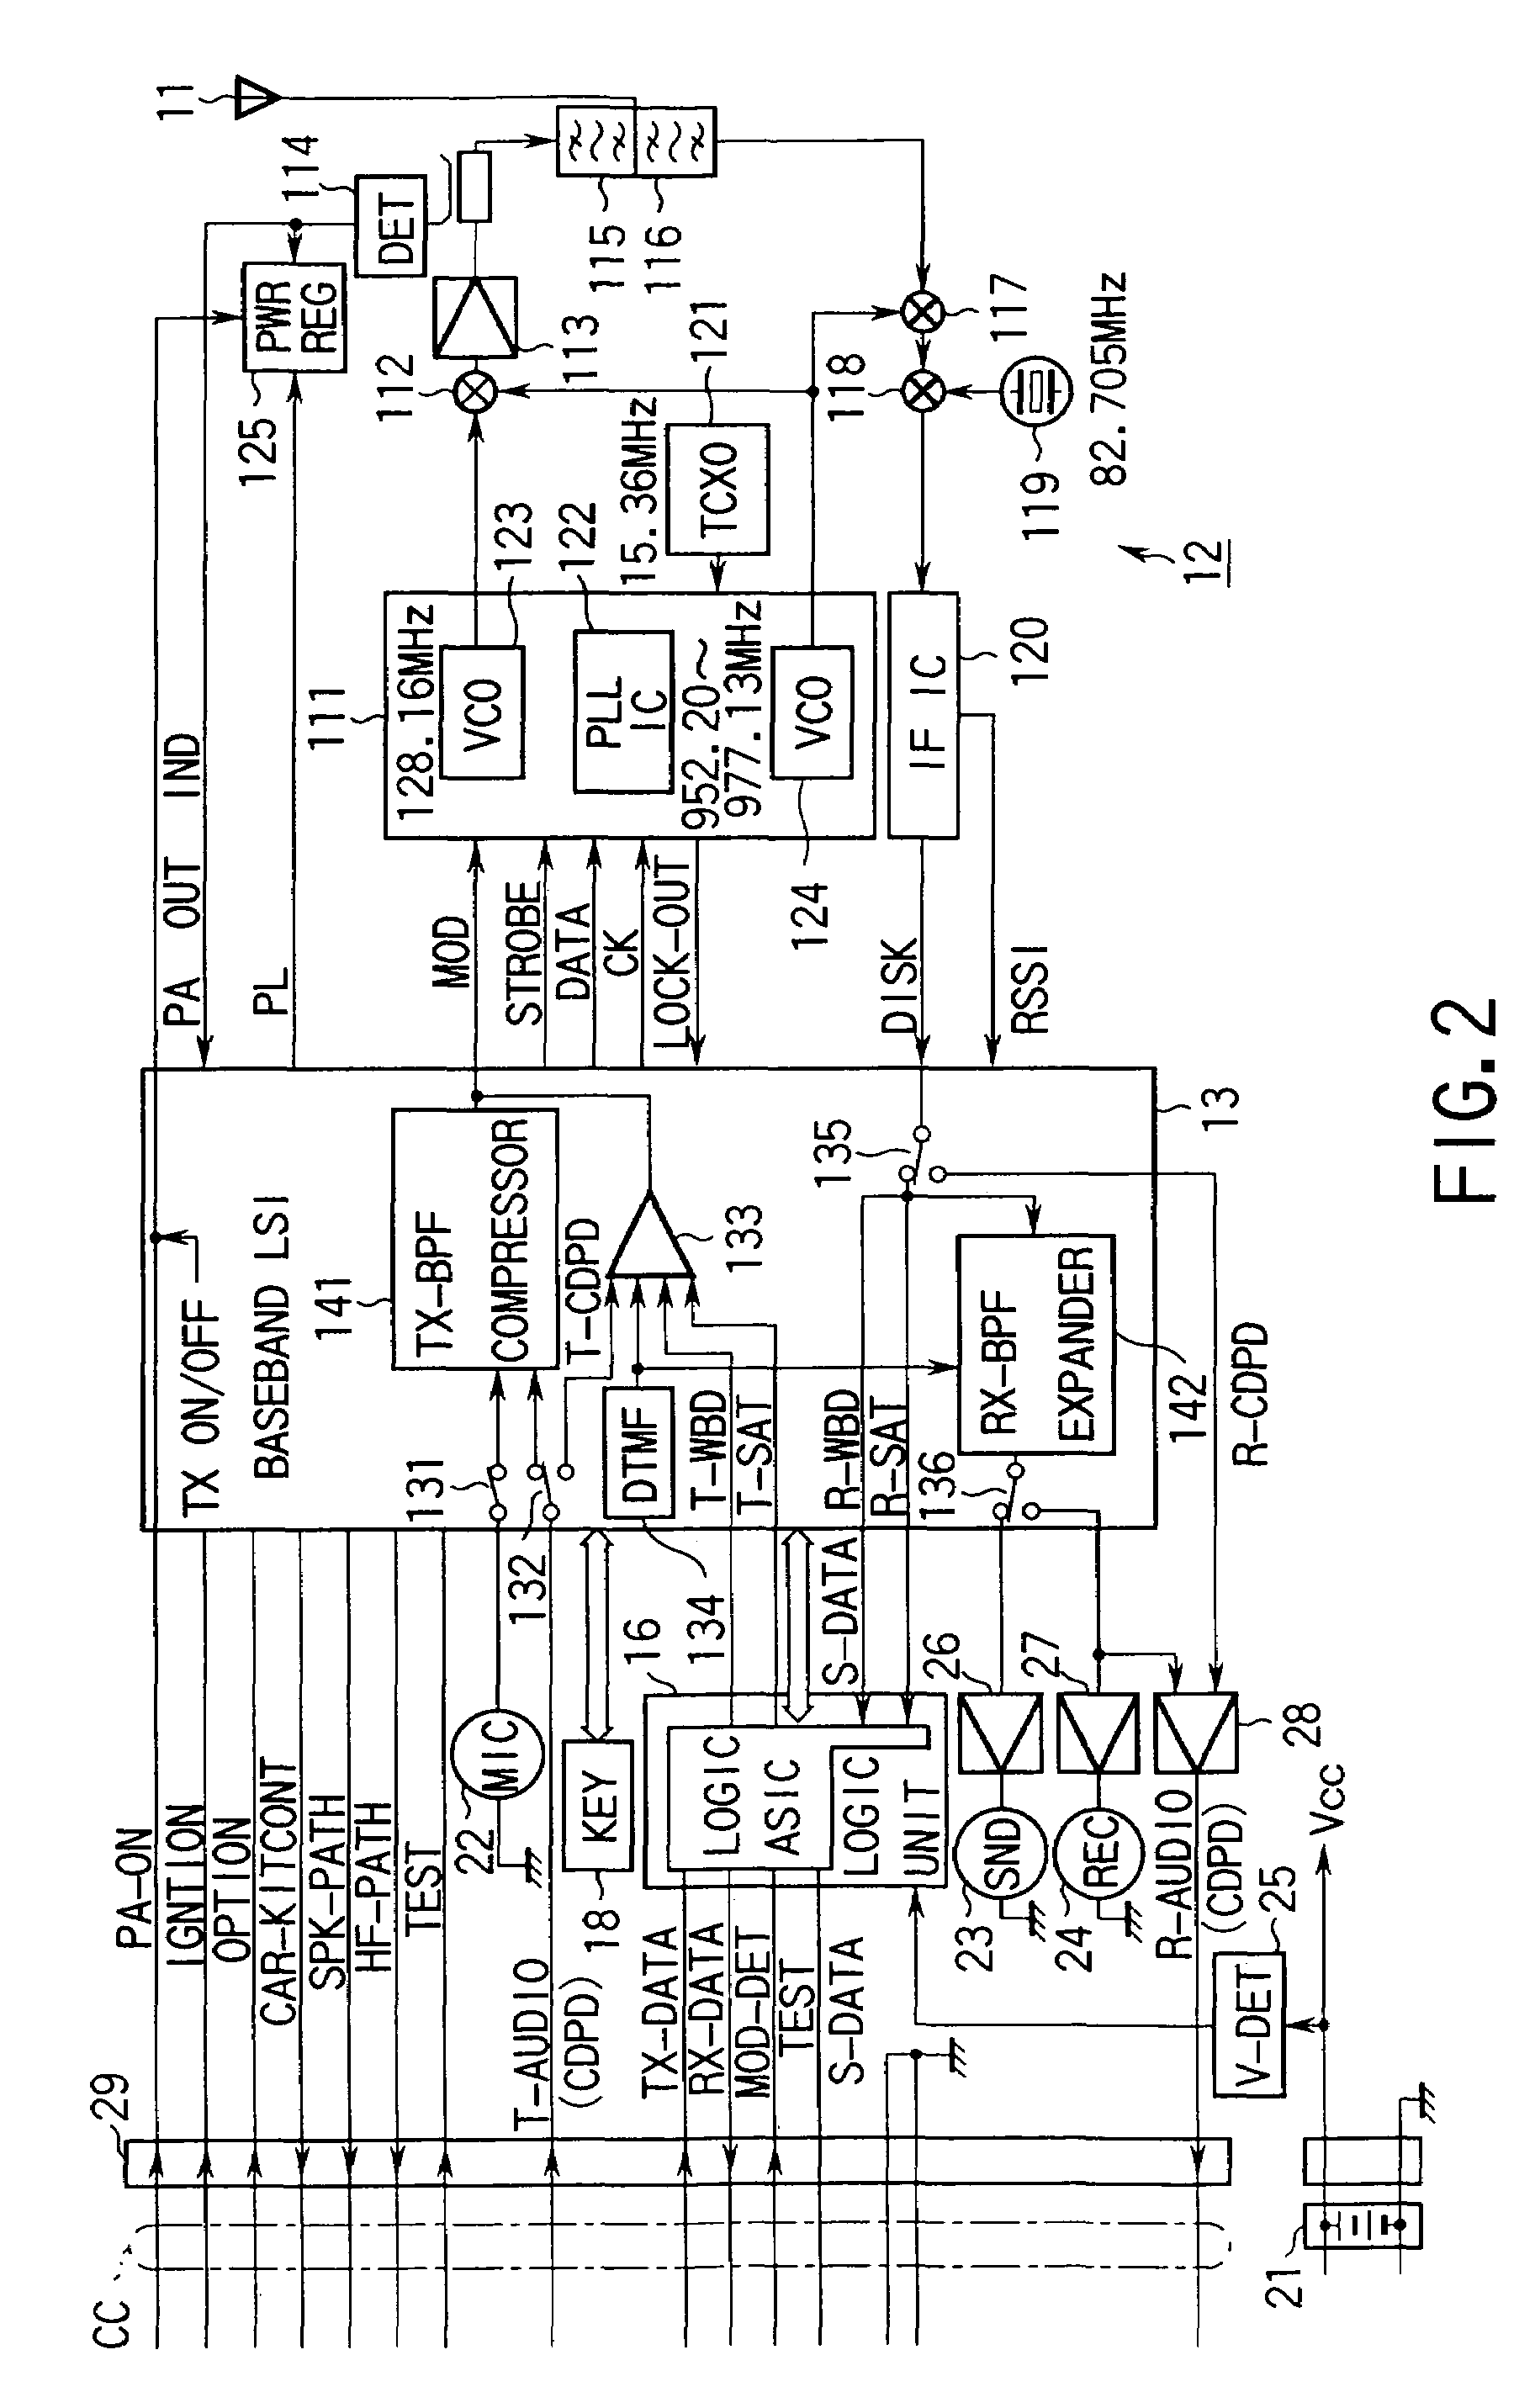 Mobile communication terminal apparatus with data communication function